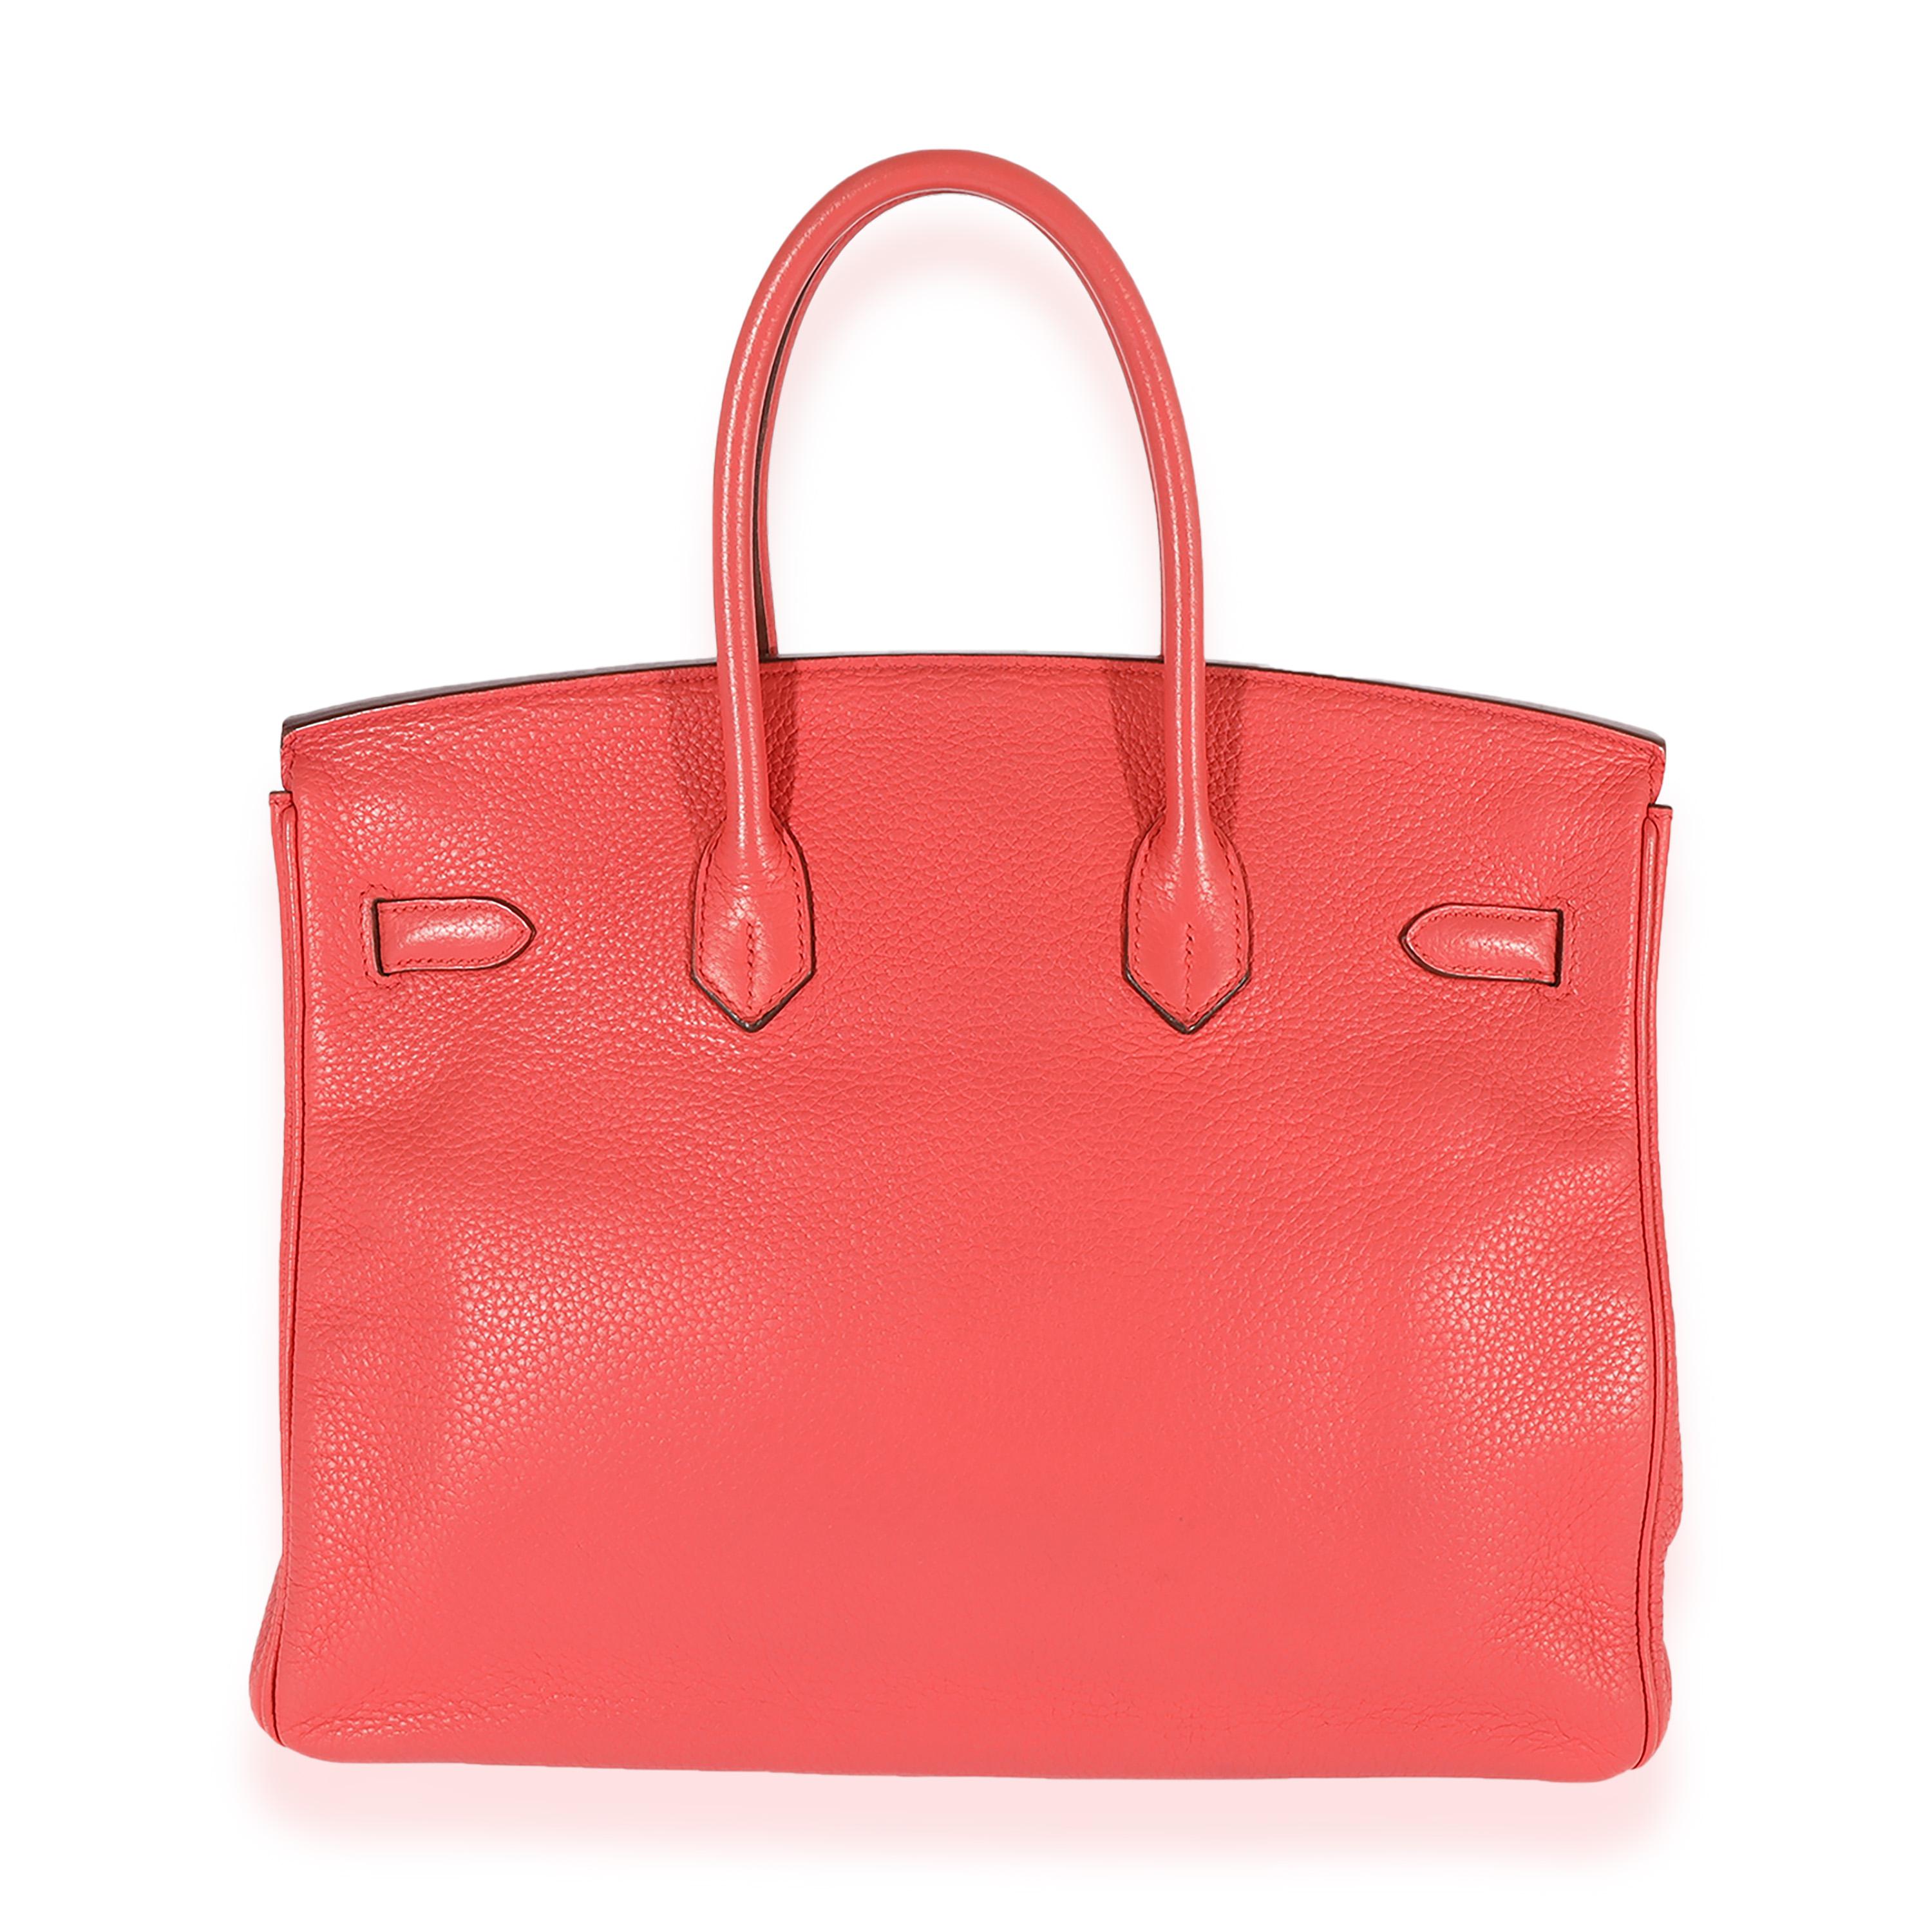 Listing Title: Hermès Bougainvillea Clémence Birkin 35 PHW
SKU: 119741
Condition: Pre-owned 
Handbag Condition: Very Good
Condition Comments: Very Good Condition. Discoloration to leather. Scuffing to corners. Scratching to hardware. Scuffing and